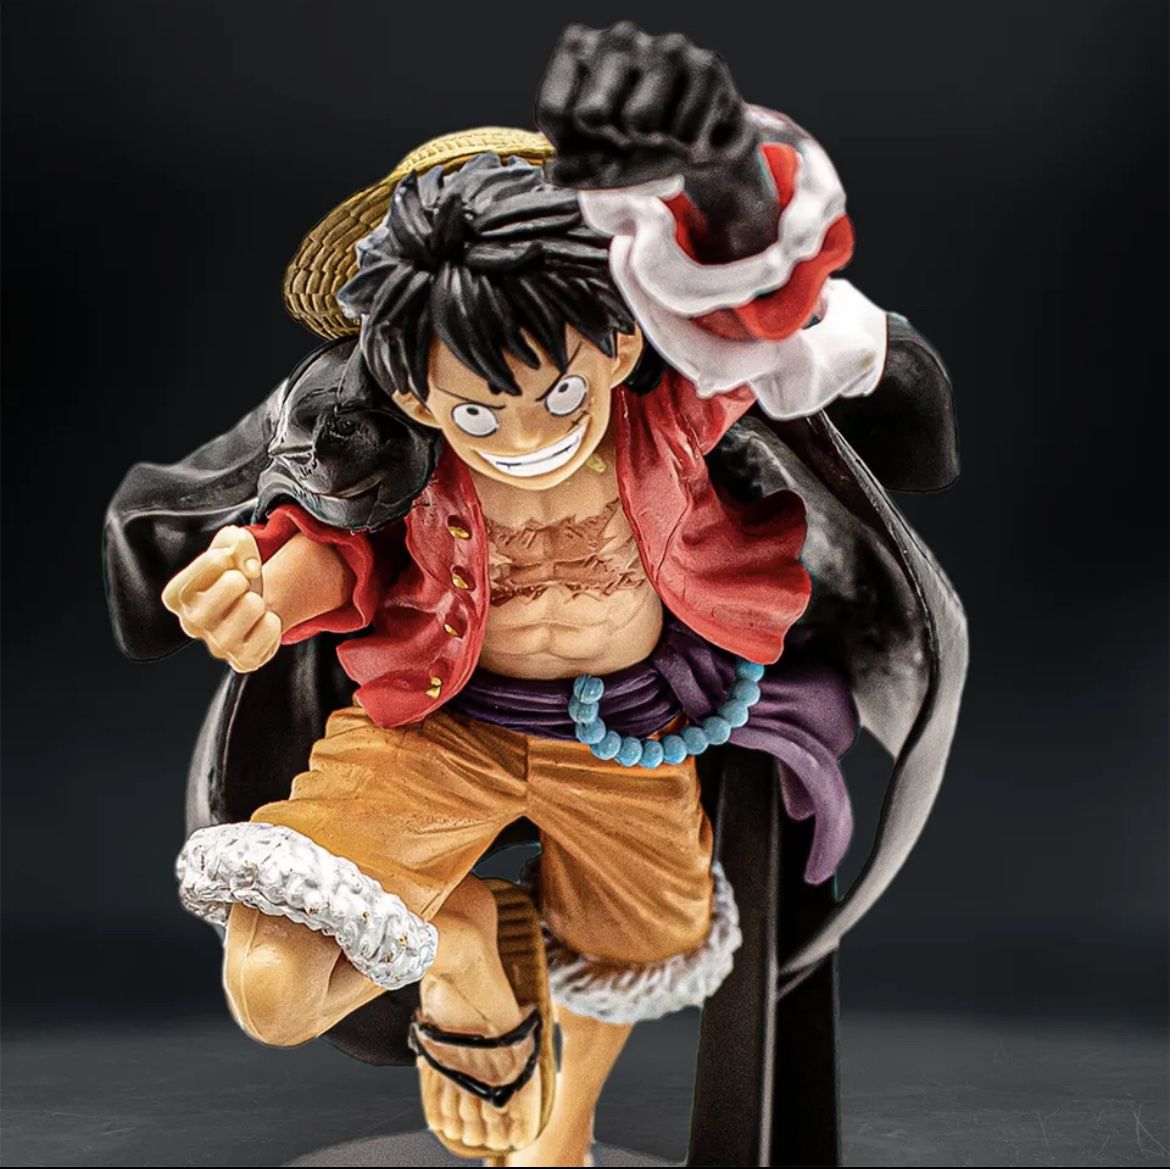 New Monkey D Luffy Punching Haki Pose One Piece Anime Action Figure Toy Statue